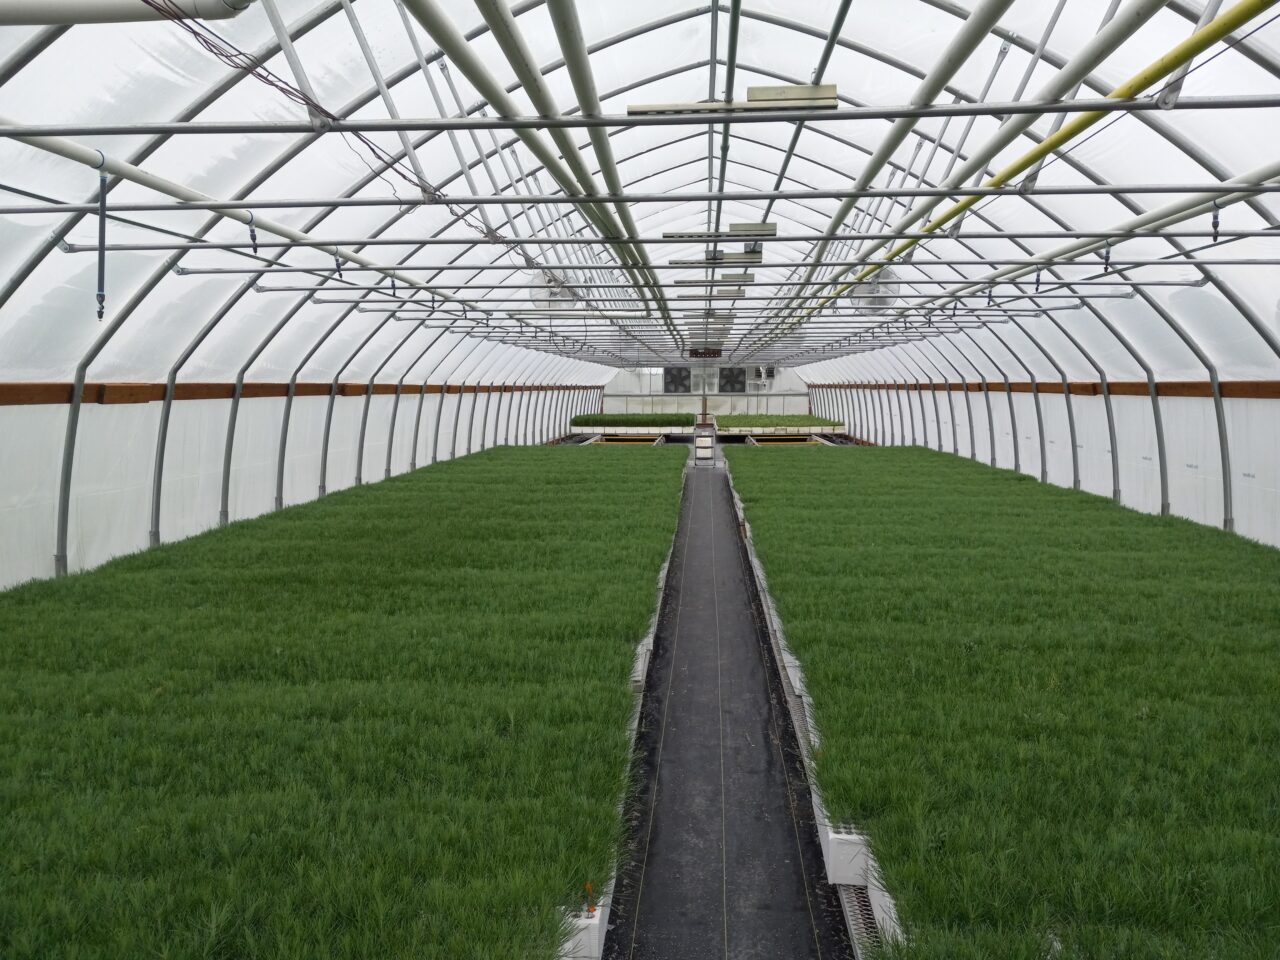 Ponderosa pine seedlings grow in the new Anaconda greenhouse at the Montana Conservation Seedling Nursery. With the addition of the greenhouse, the Missoula nursery will be able to grow 239,000 more seedlings every year, including for the Northern Cheyenne Tribe.